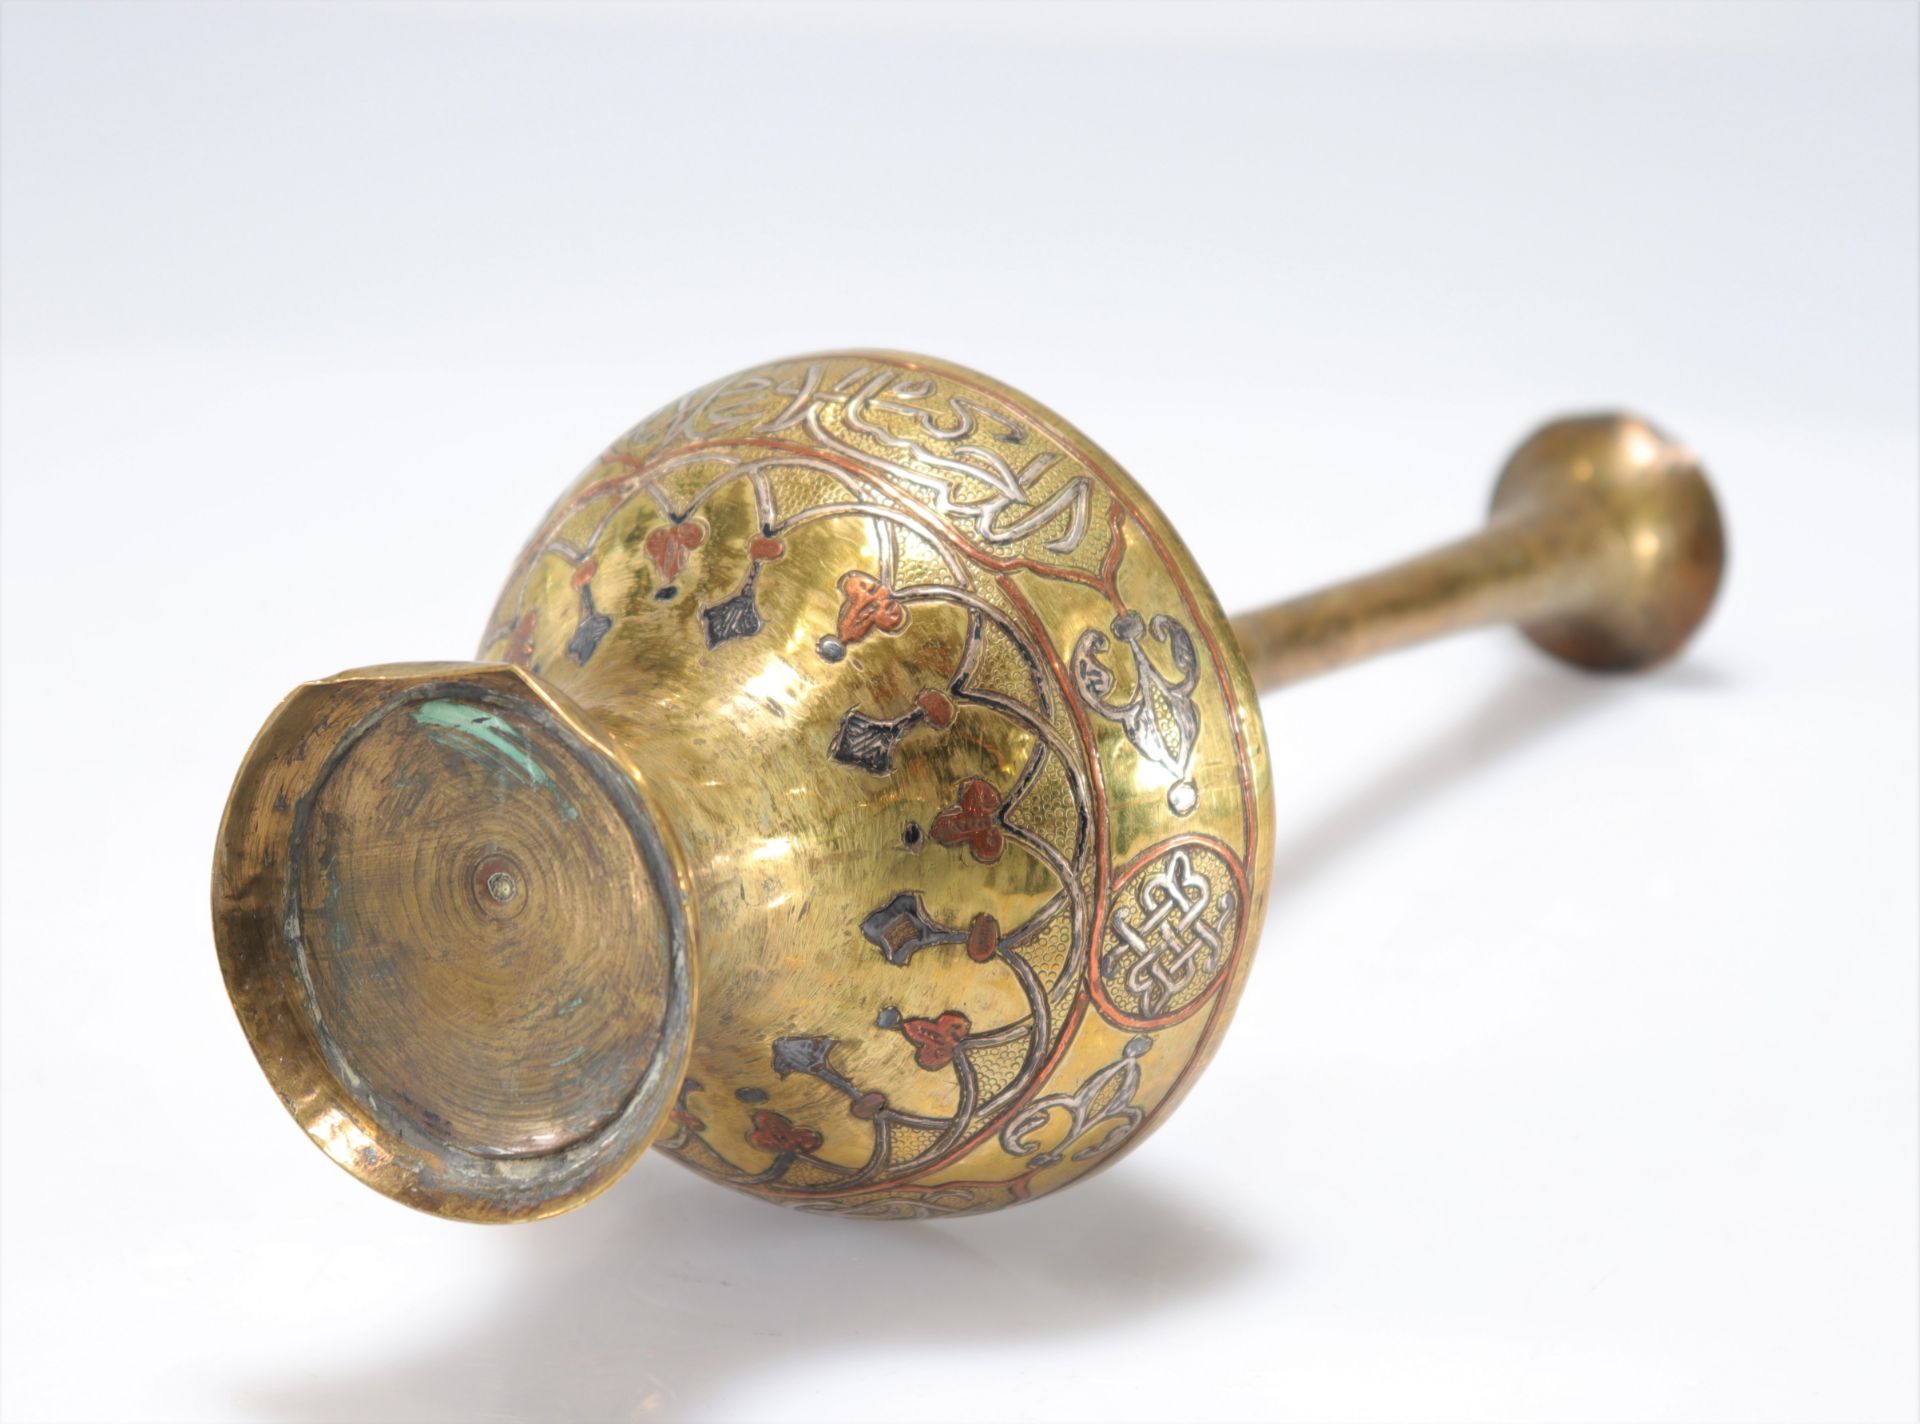 Ottoman vase brass and silver and copper inlay "Cairowe" - Image 4 of 5